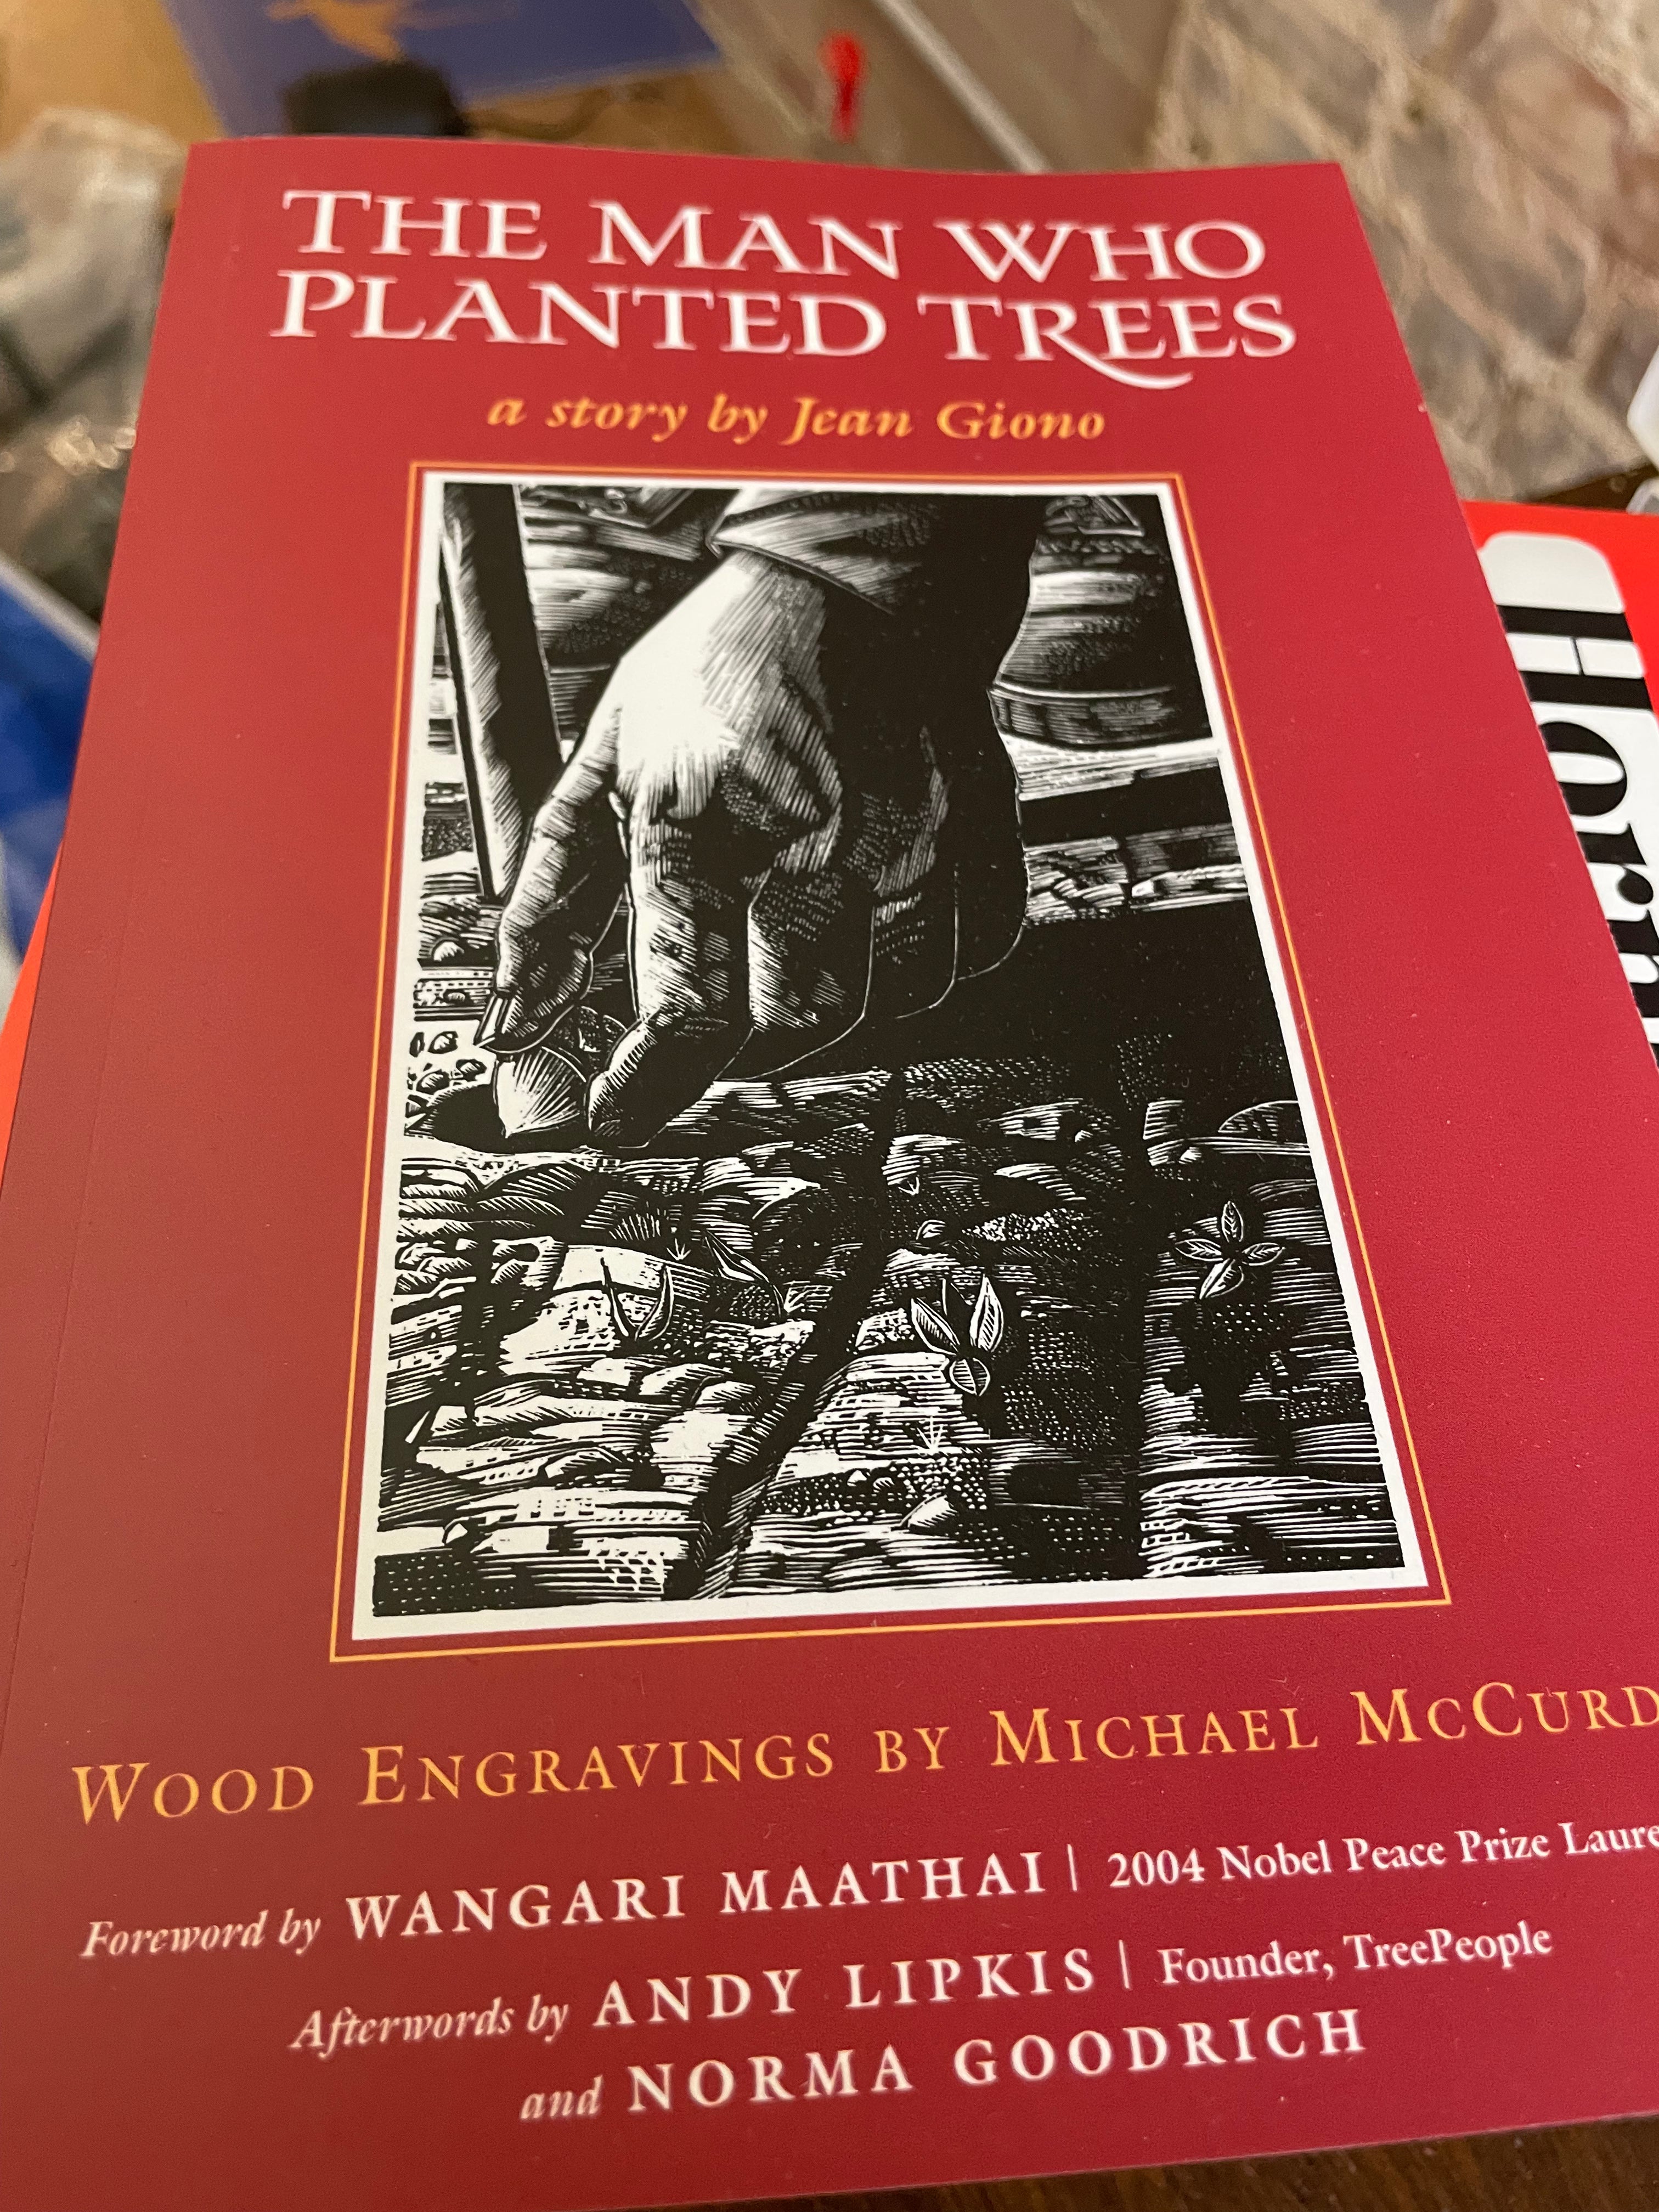 Book Package: The Man Who Planted Trees